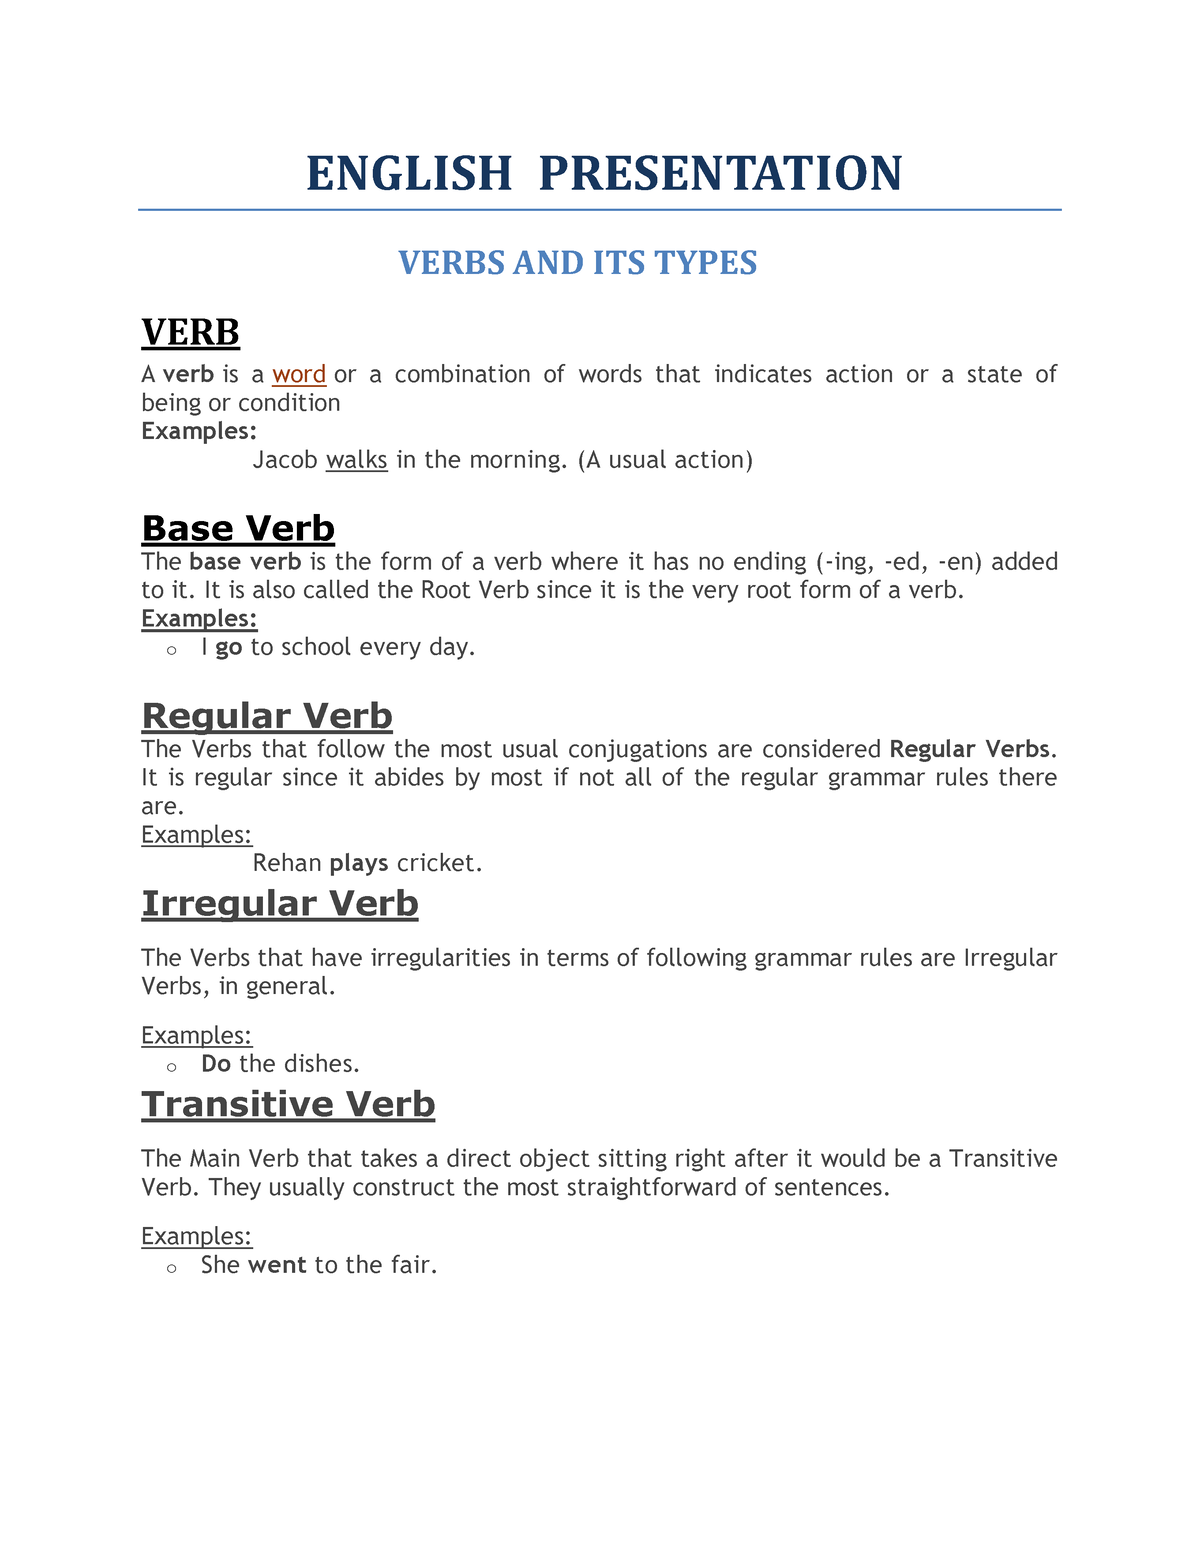 2verb-and-its-types-english-presentation-english-presentation-verbs-and-its-types-verb-a-verb